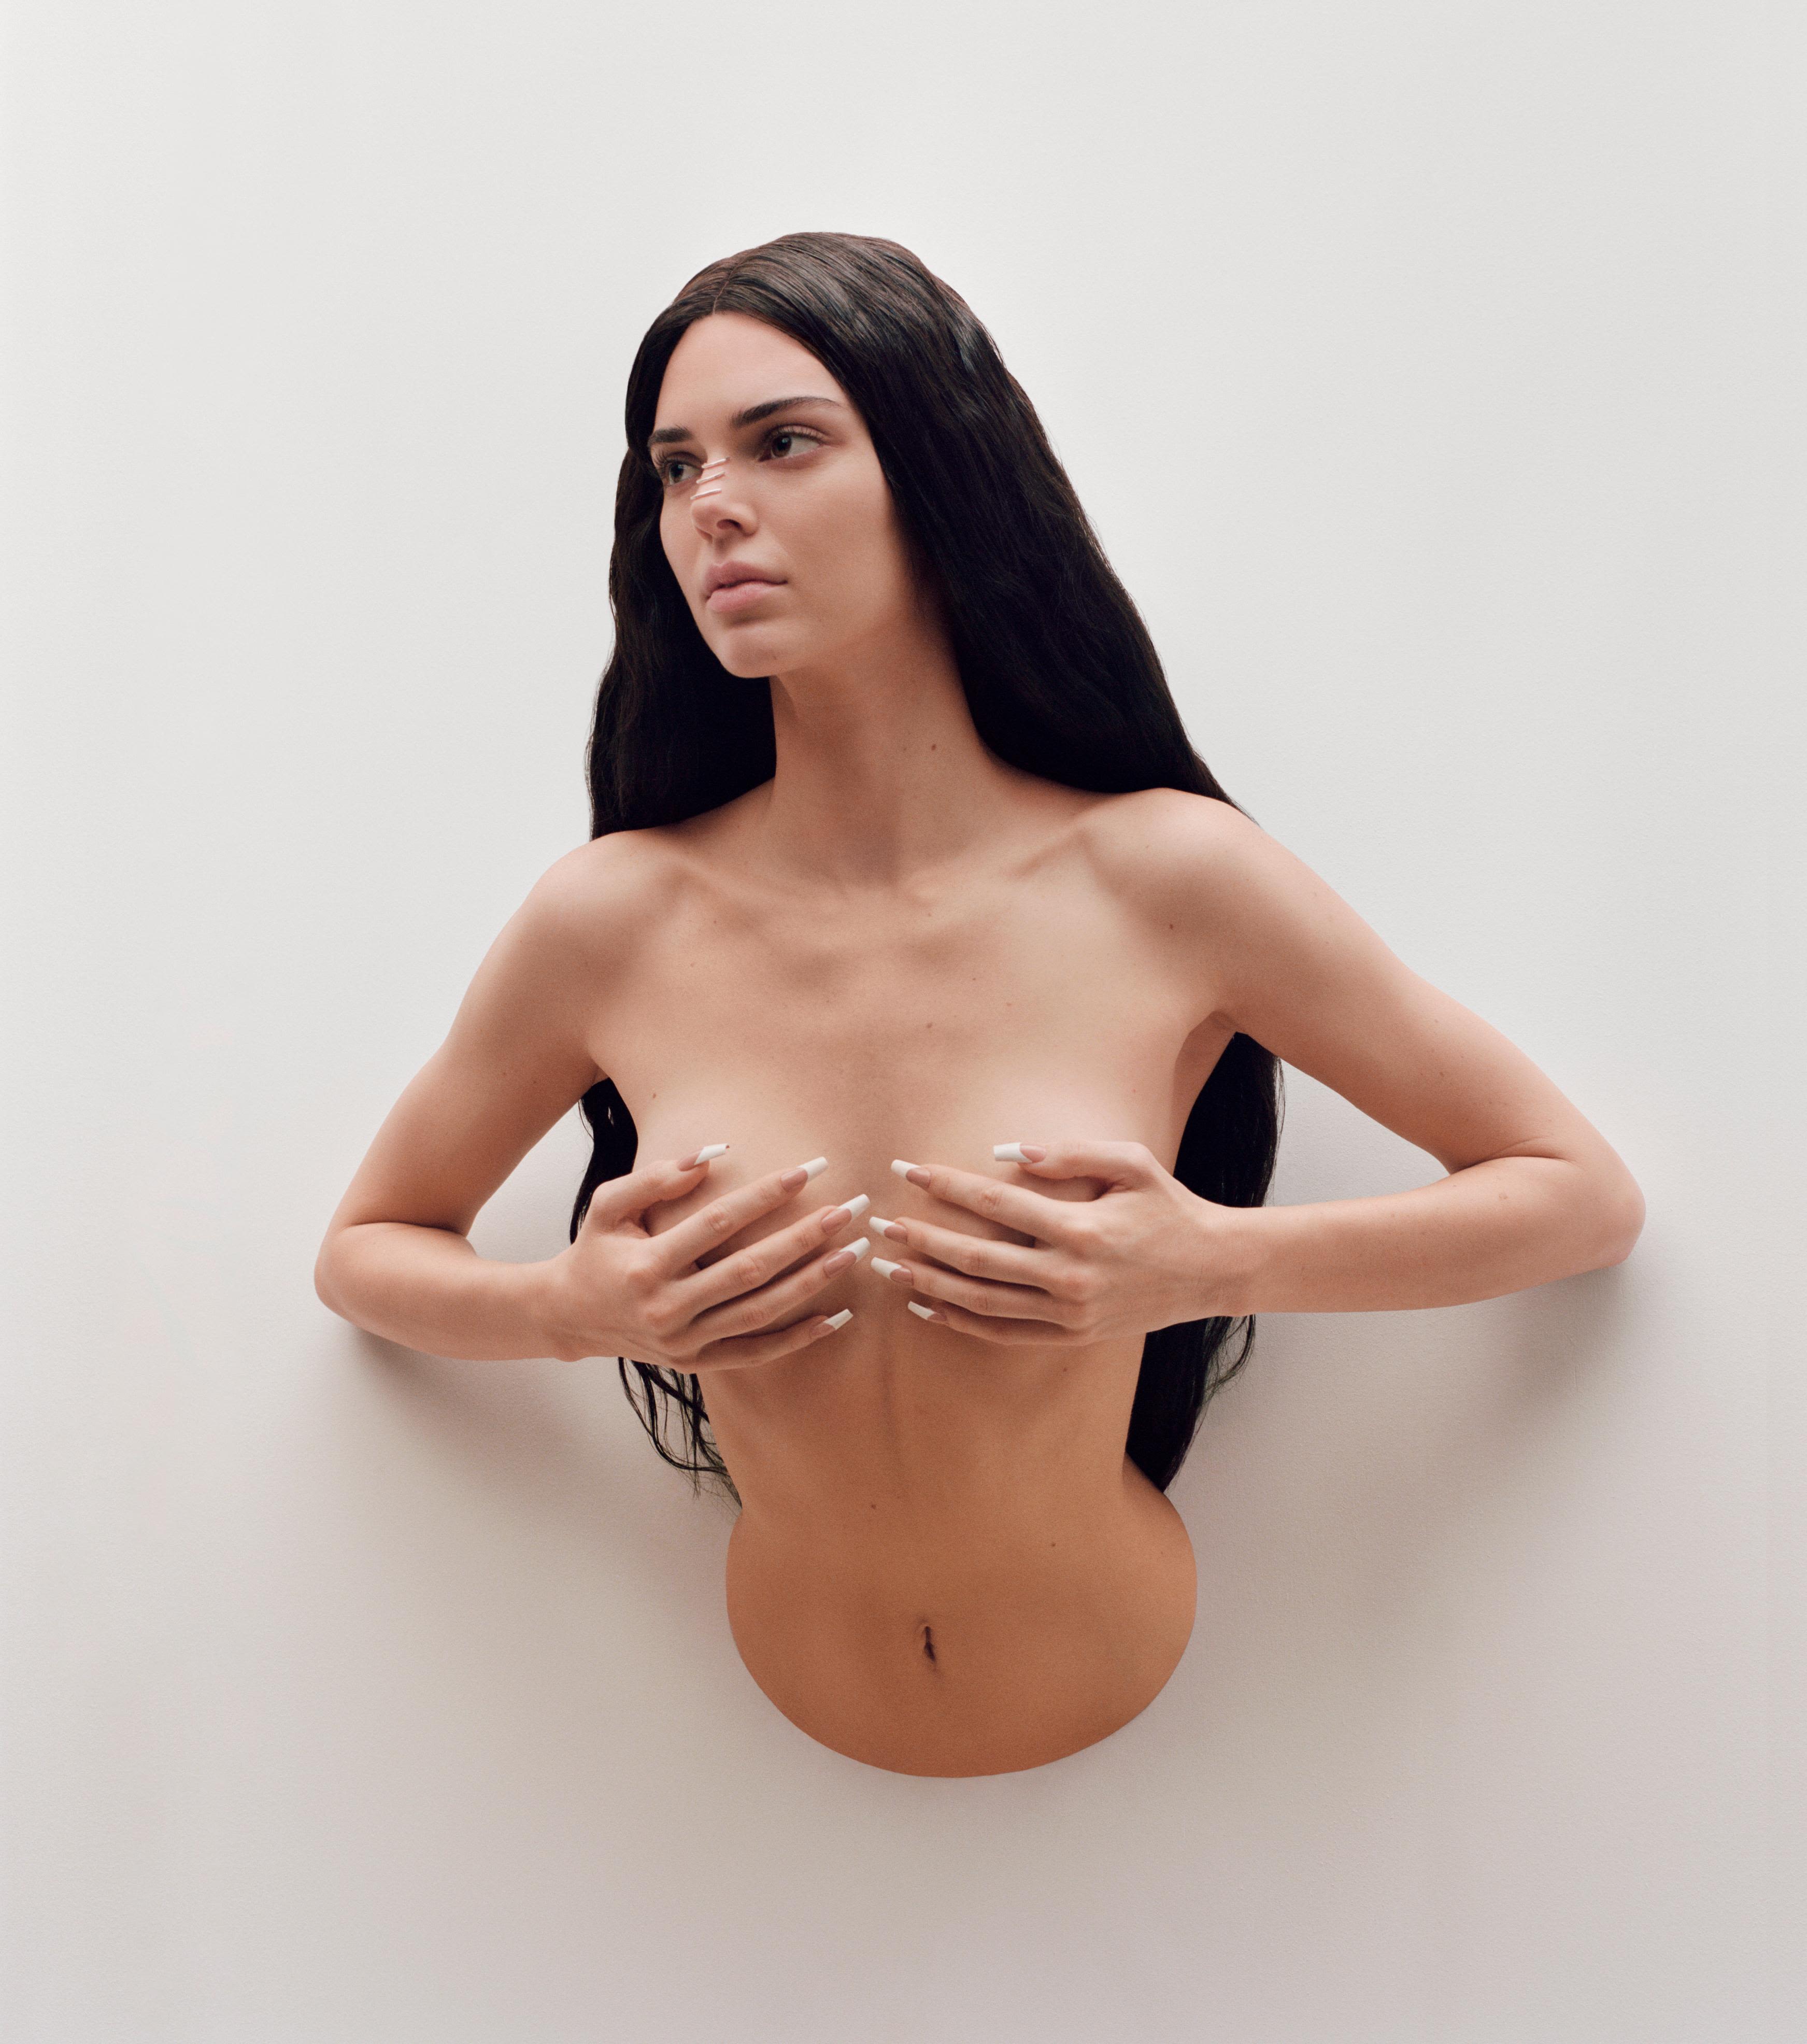 Kendall Jenner photographed as topless wax model by banana art provocateur  | CNN